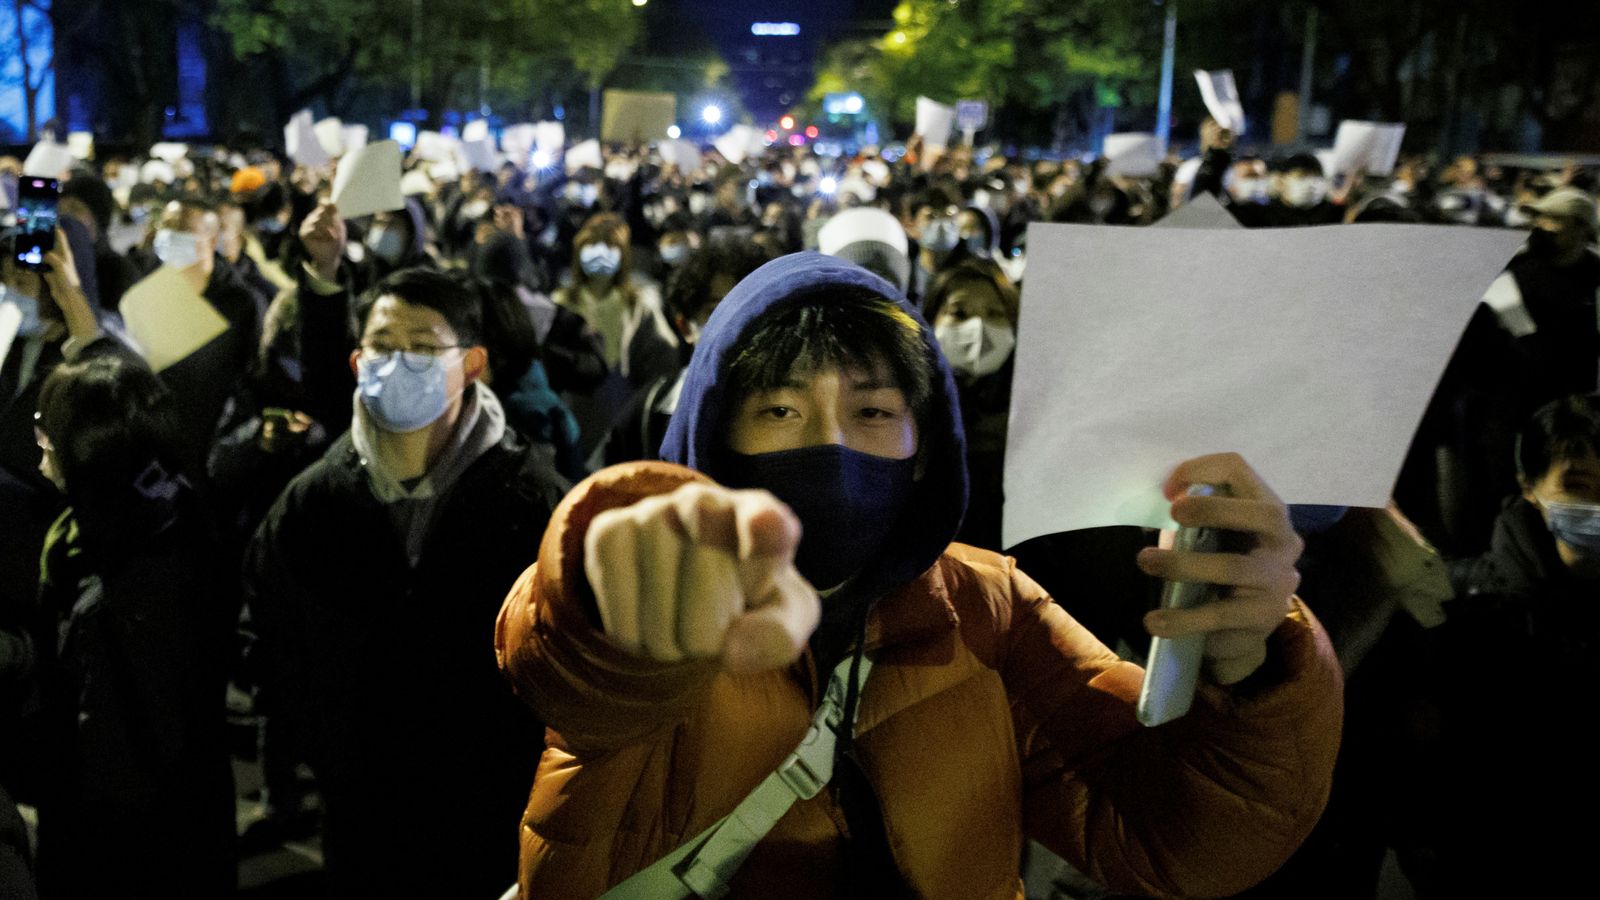 What triggered the protests in China and what tactics have been used?